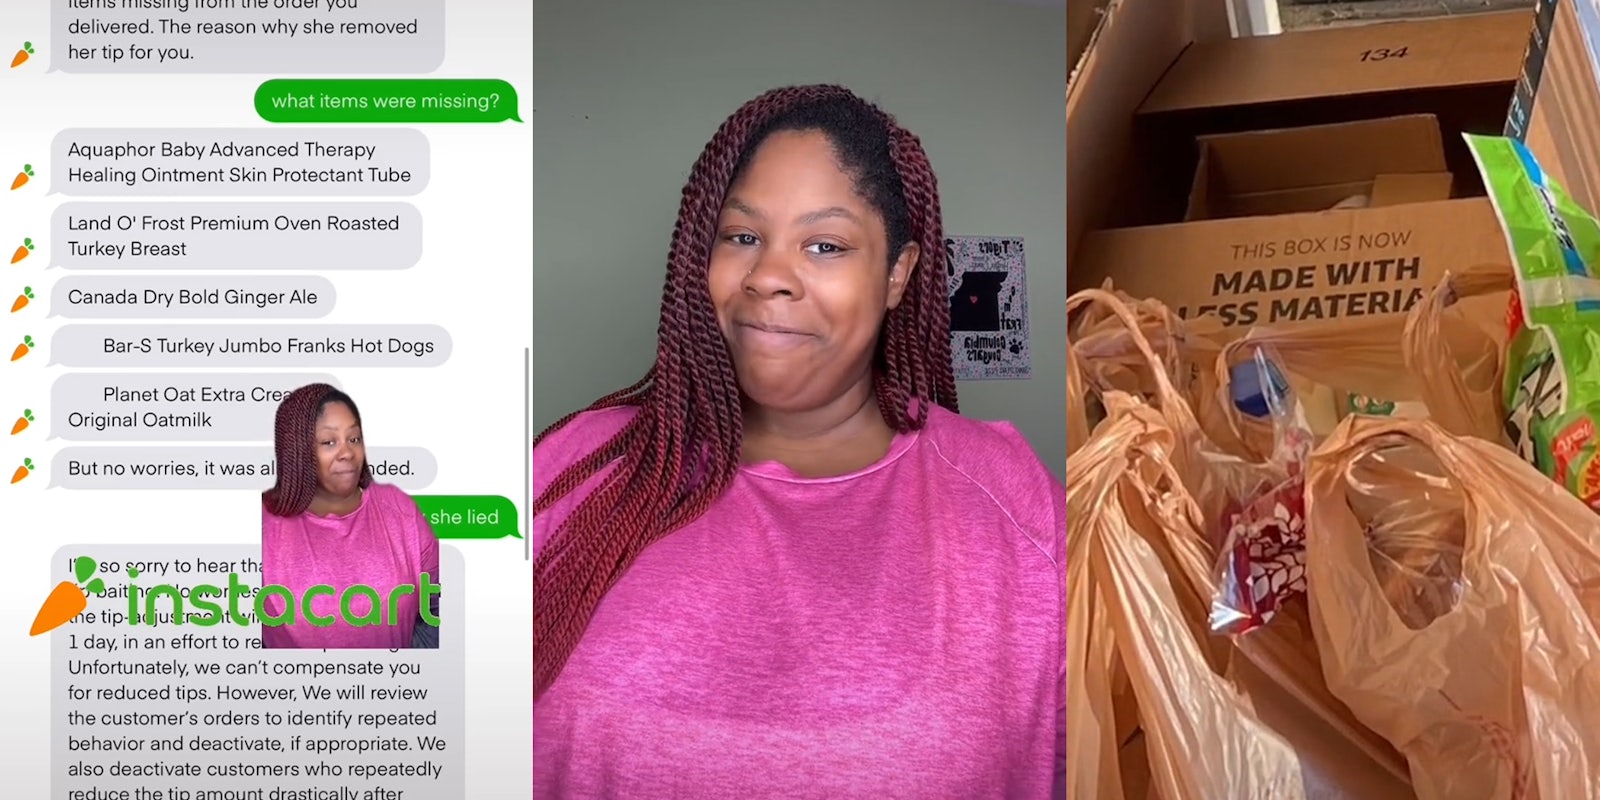 woman with DM background and instacart logo (l) woman smiling (c) groceries in bags (r)